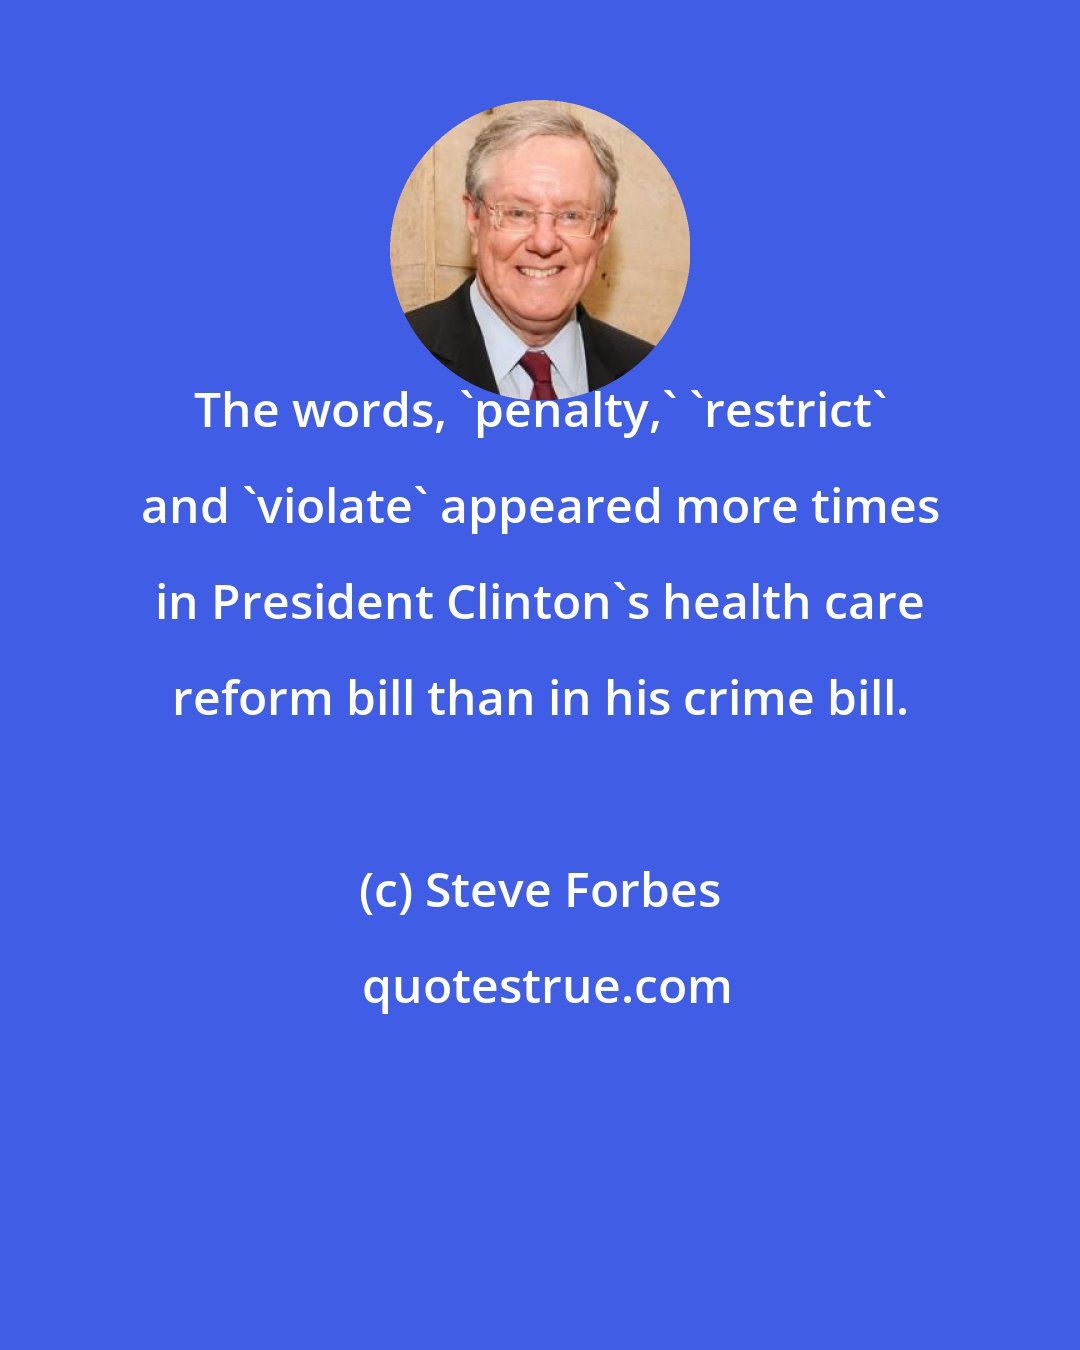 Steve Forbes: The words, 'penalty,' 'restrict' and 'violate' appeared more times in President Clinton's health care reform bill than in his crime bill.